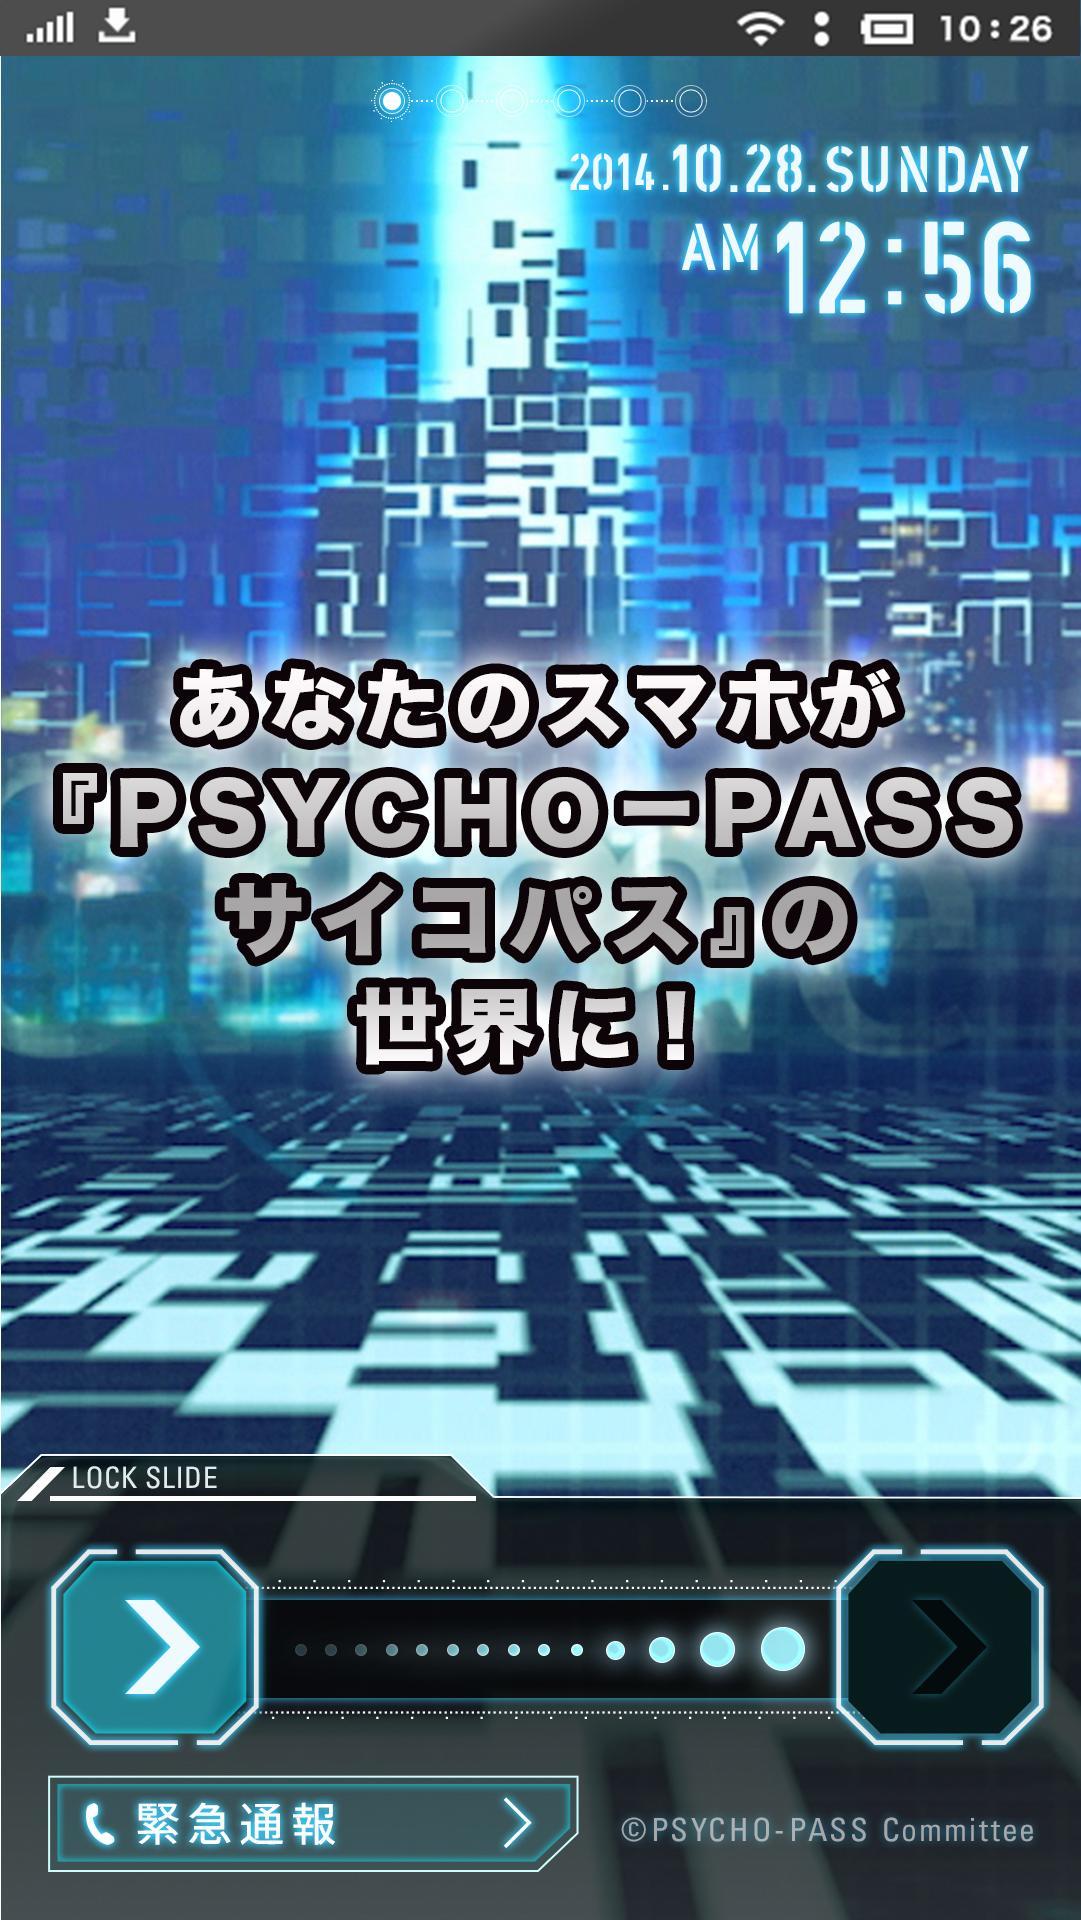 Psycho Pass サイコパスfone Lock For Android Apk Download